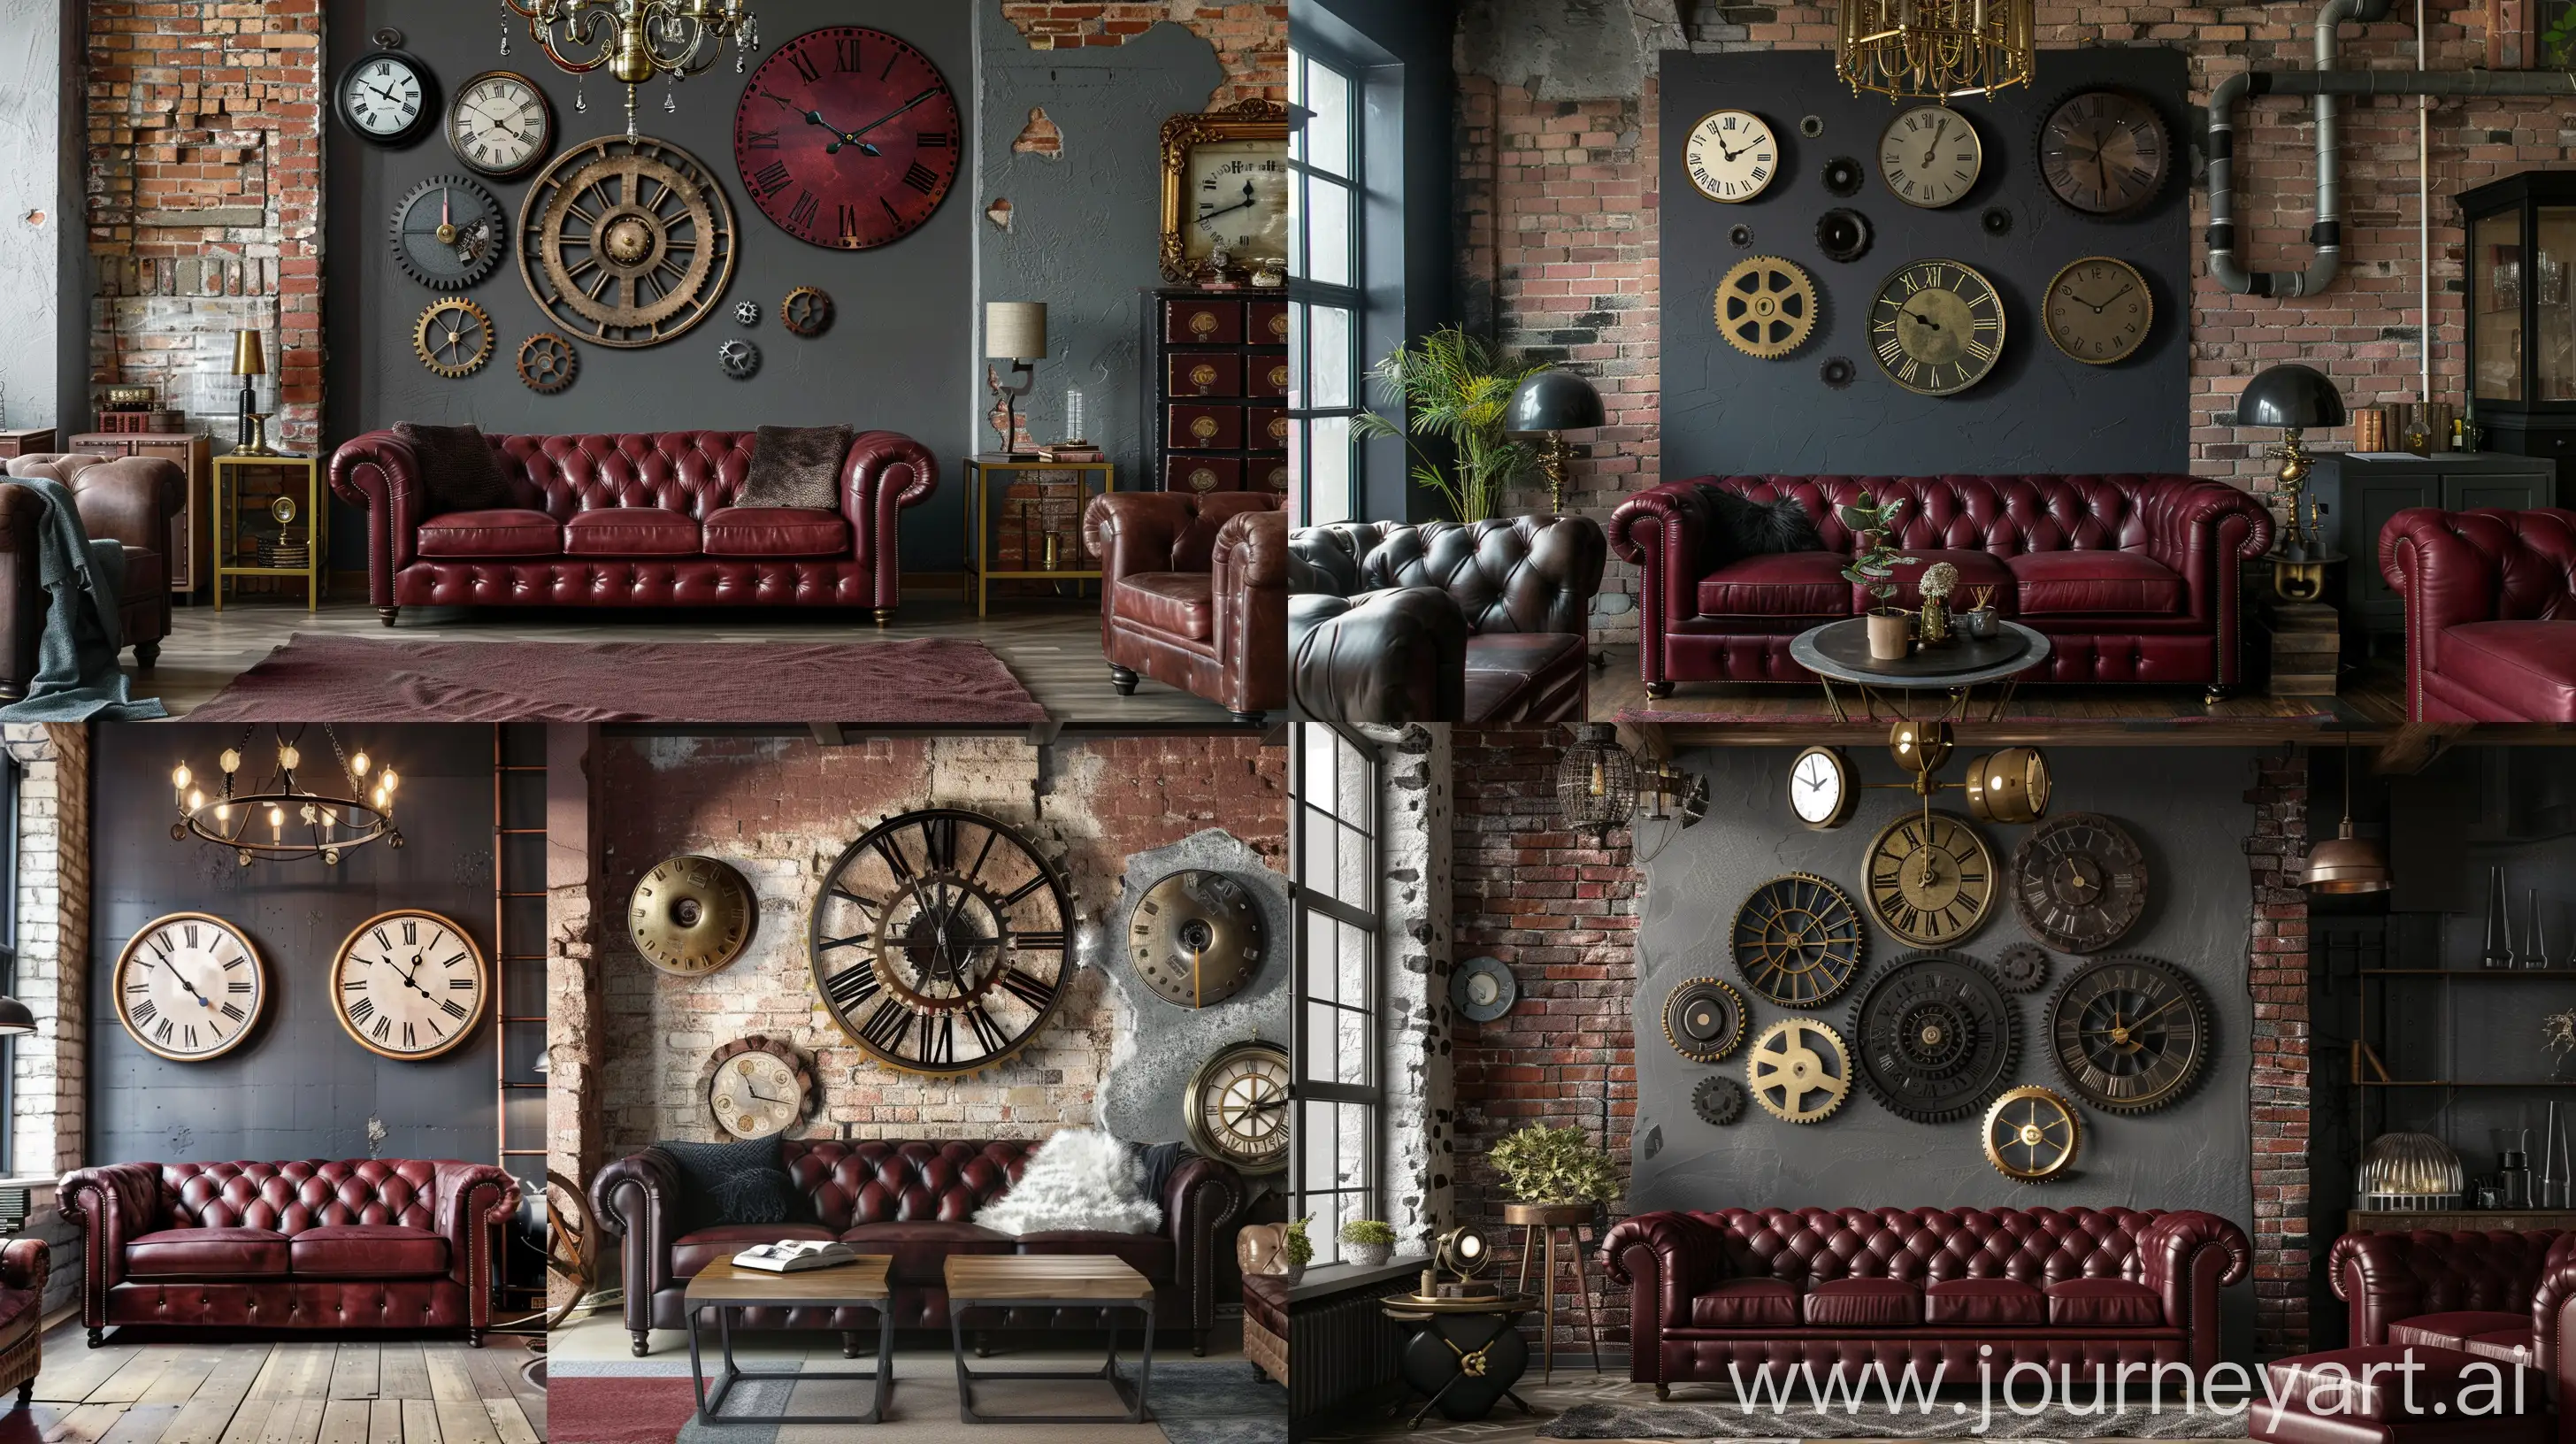 Vintage-Industrial-Chic-Living-Room-with-Exposed-Brick-Walls-and-Repurposed-Gear-Chandelier